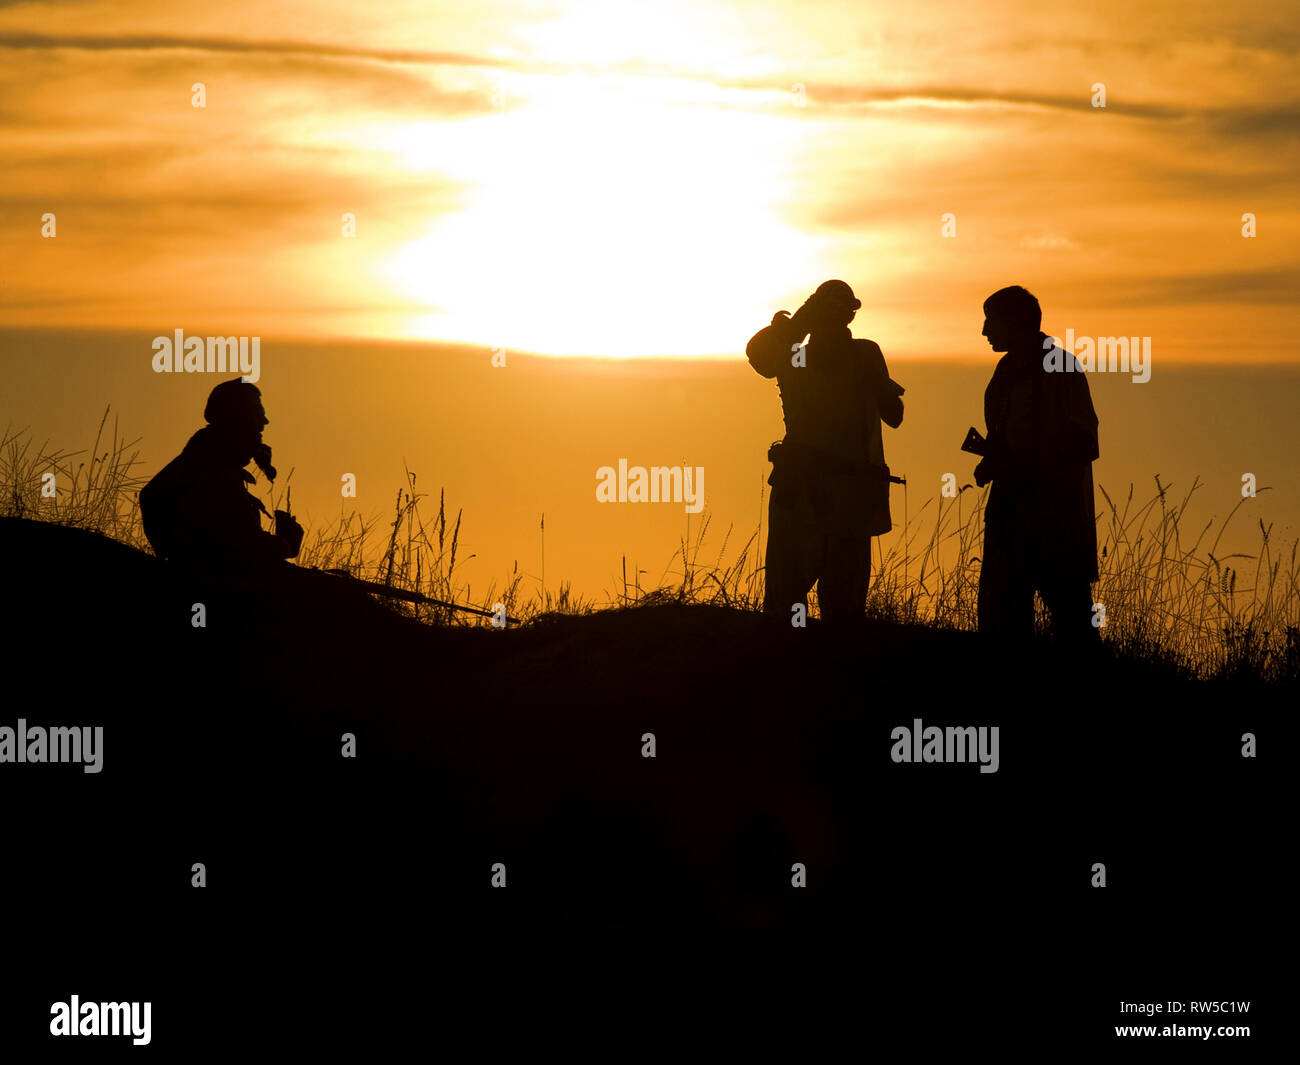 Silhouettes of several soldiers with rifles against a sunset. Stock Photo